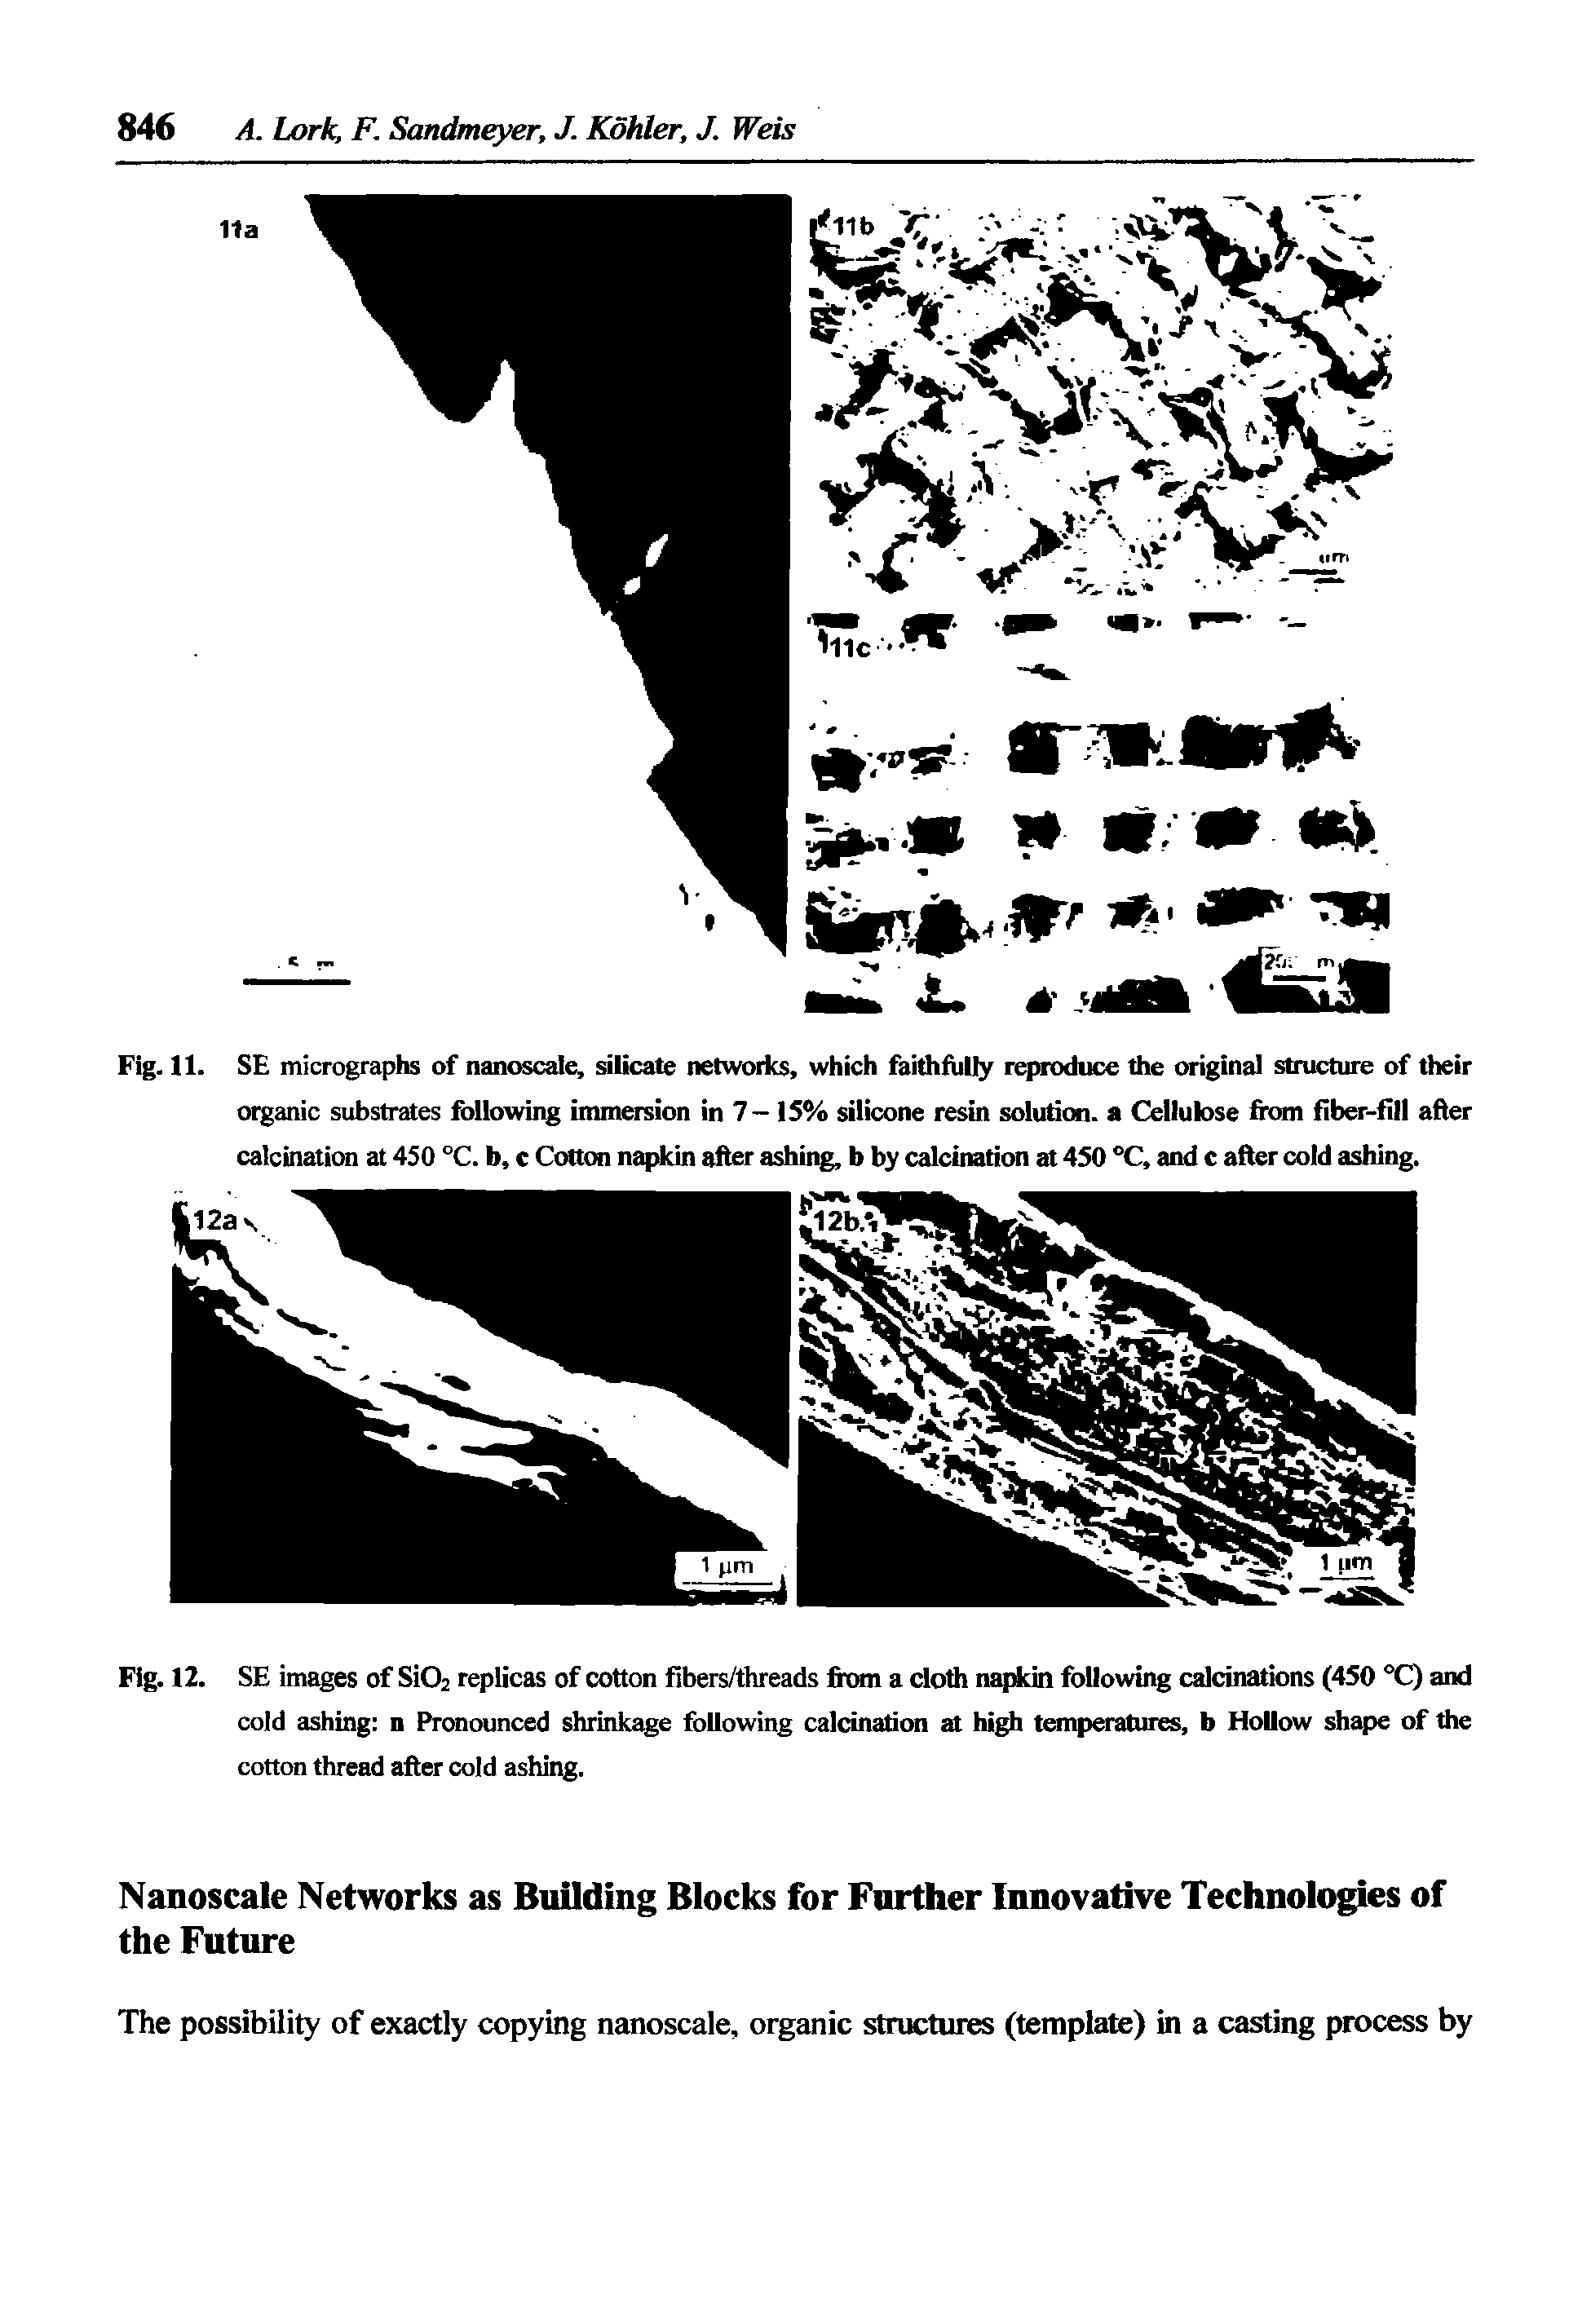 Fig. 11. SE micrographs of nanoscale, silicate networks, which faithfully reproduce the original structure of their organic substrates following immersion in 7— 1S% silicone resin solution, a Cellulose from fiber-fill after calcination at 450 °C. b, c Cotton nafddn after ashing, b by calcination at 450 °C, and c after cold ashing.